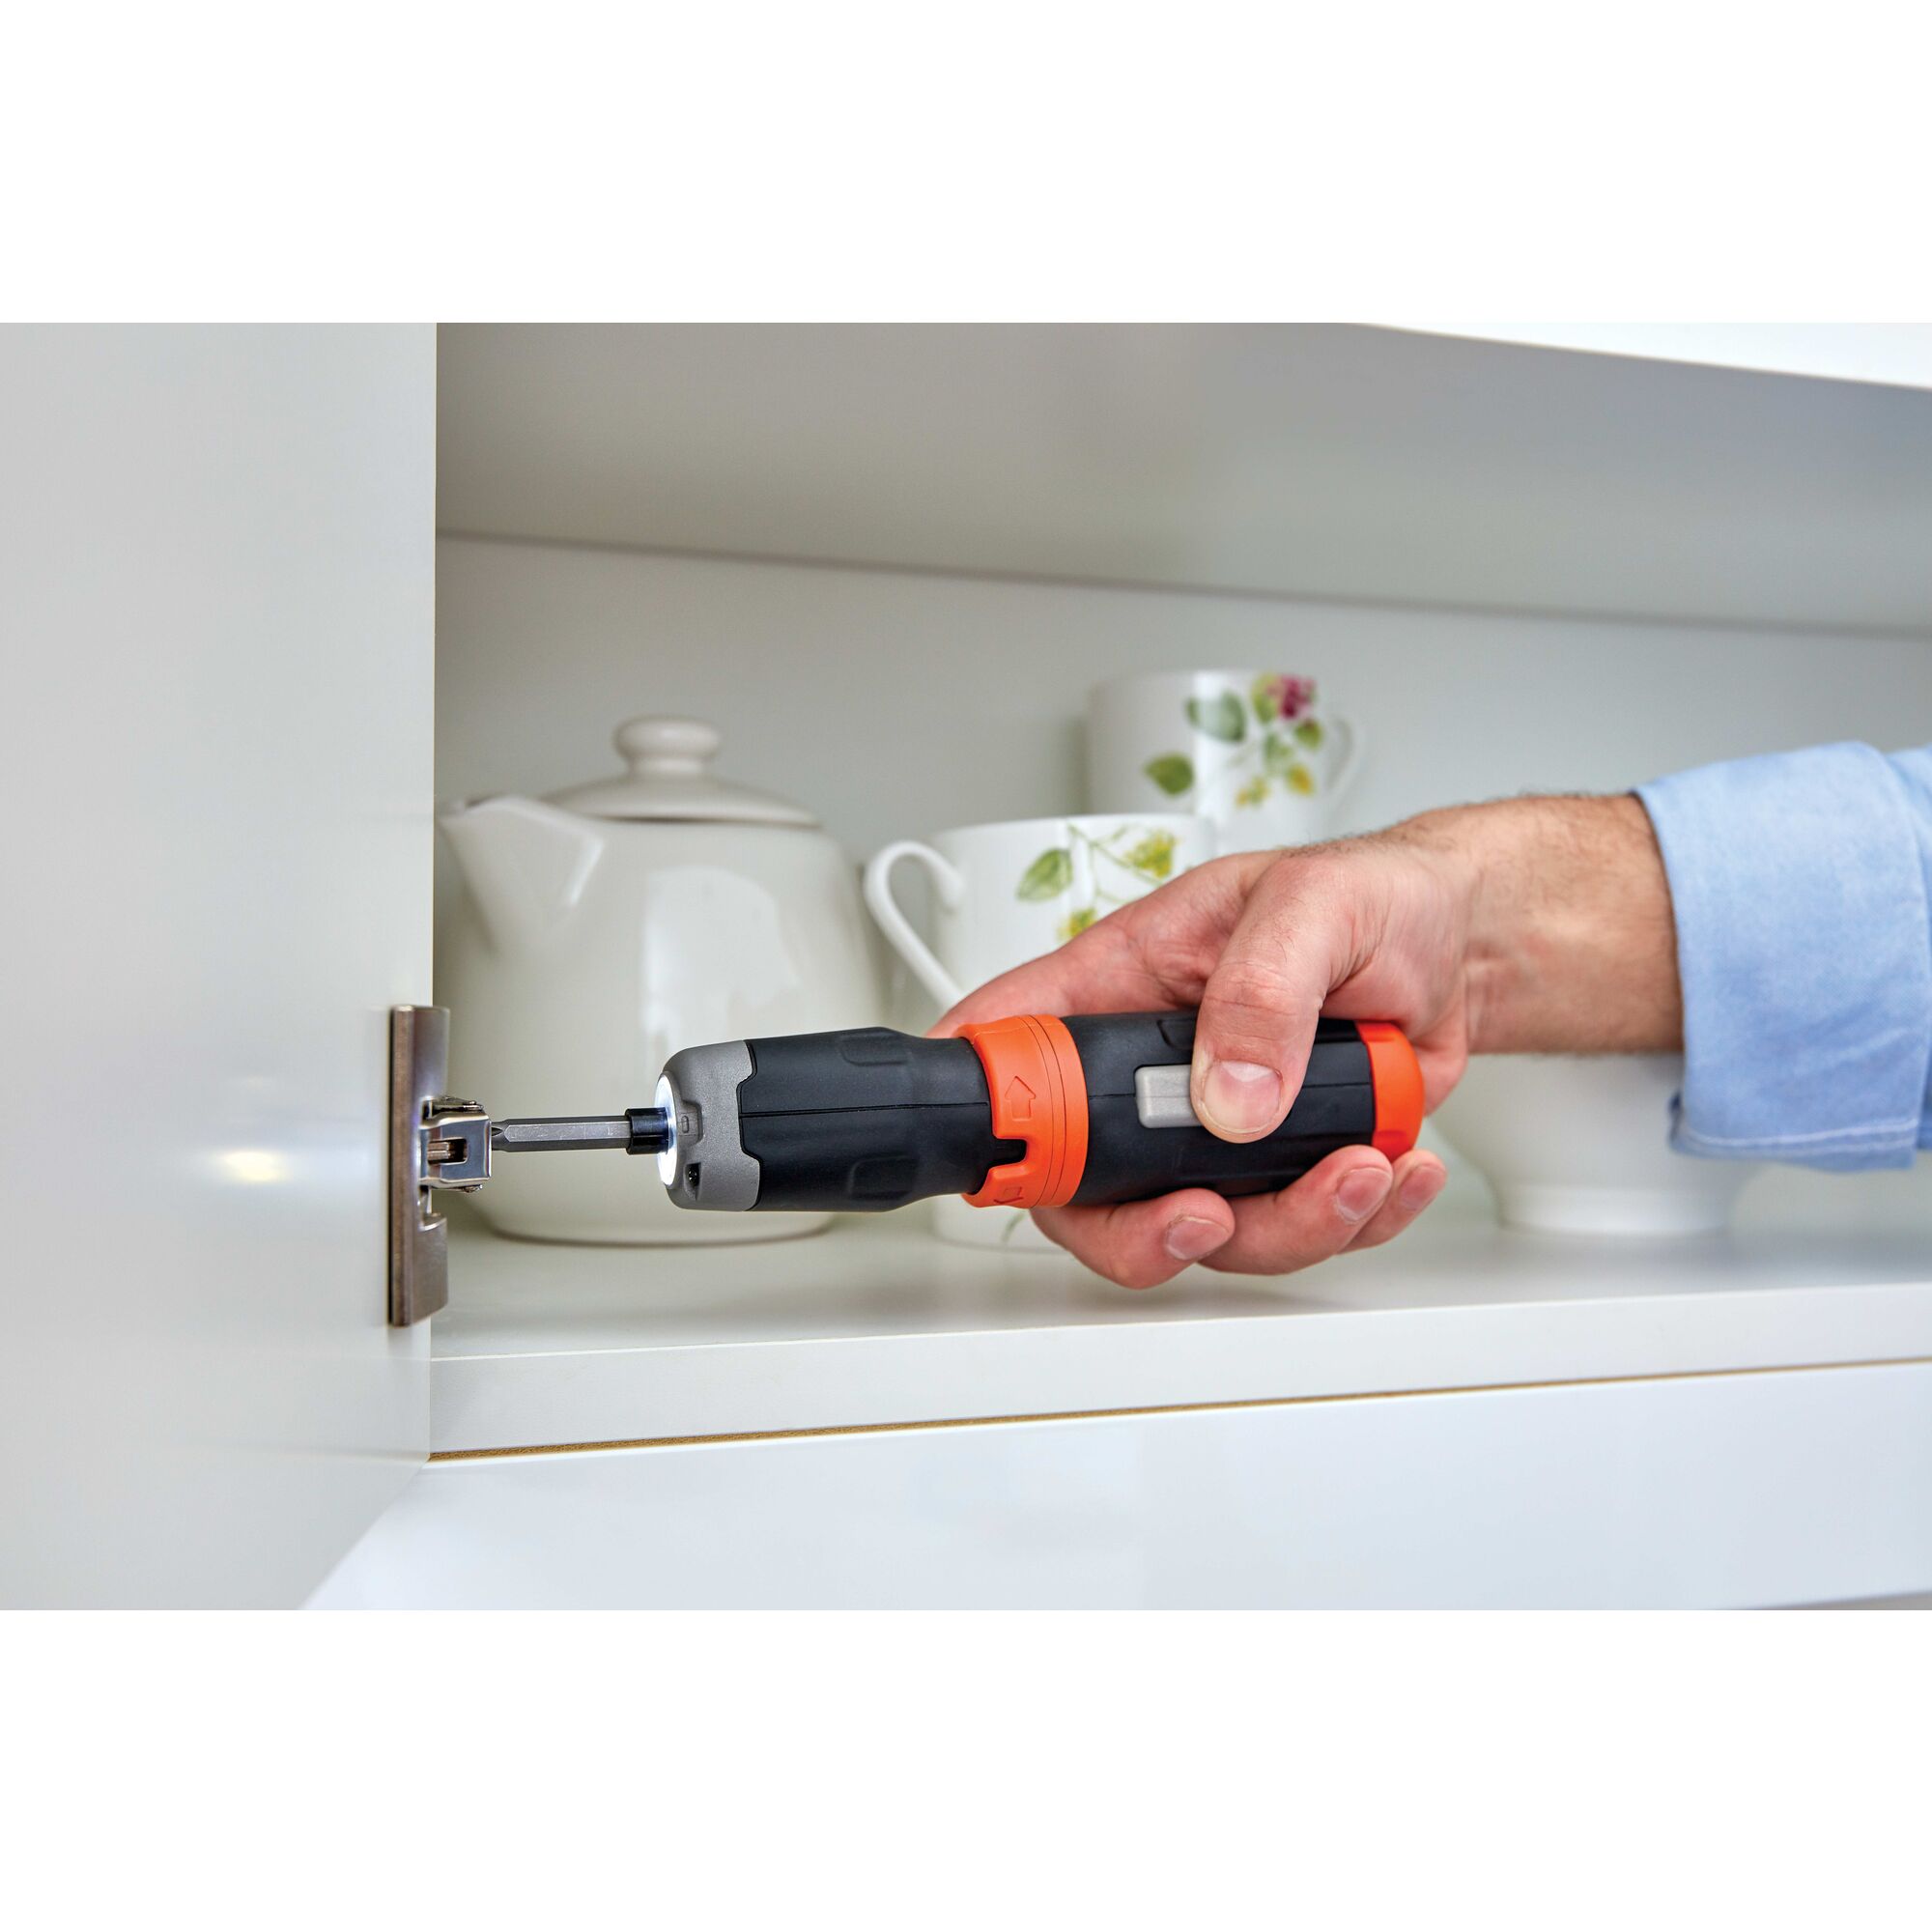 Cordless power driver screwdriver with extension shaft being used by a person.